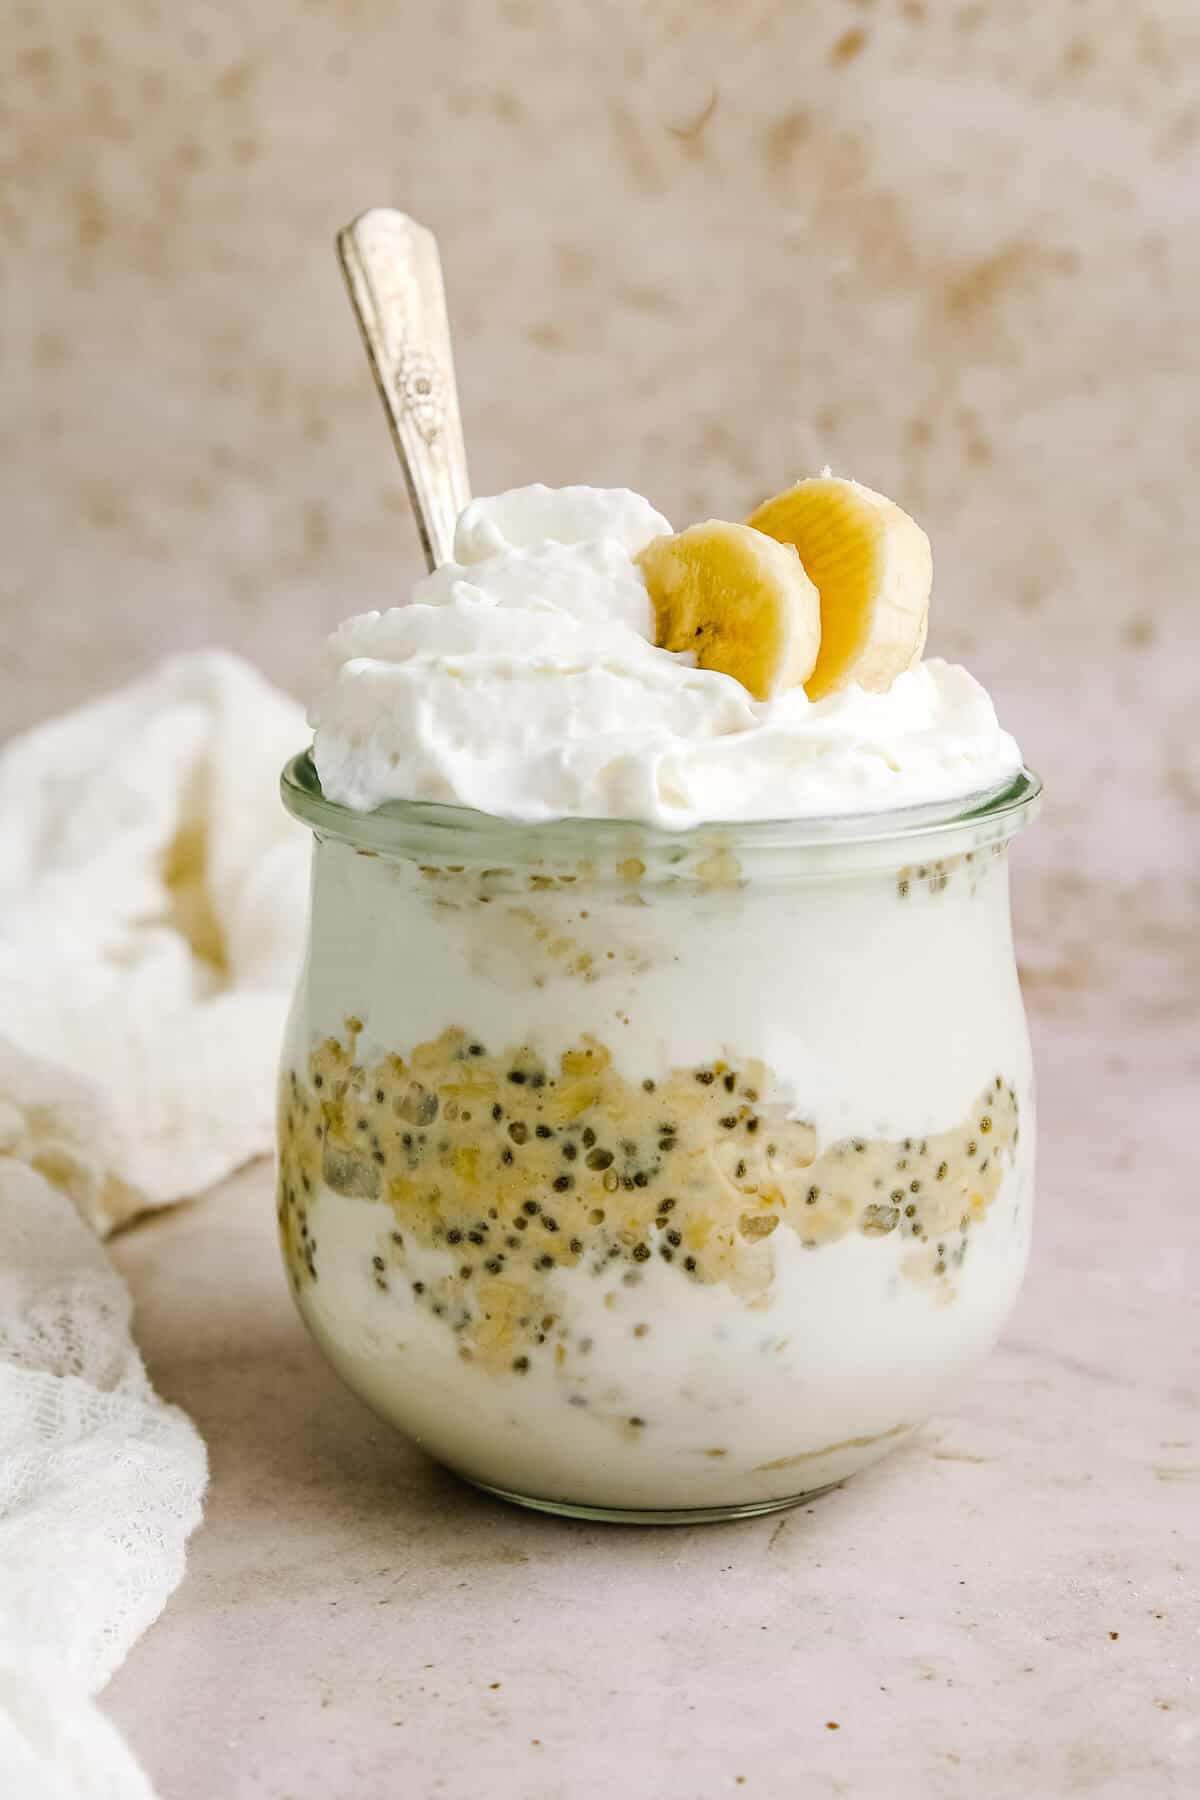 a closeup of a jar filled with layers of banana cream pie filling and chia seeds with overnight oats, topped with whipped cream and two banana slices with a silver spoon